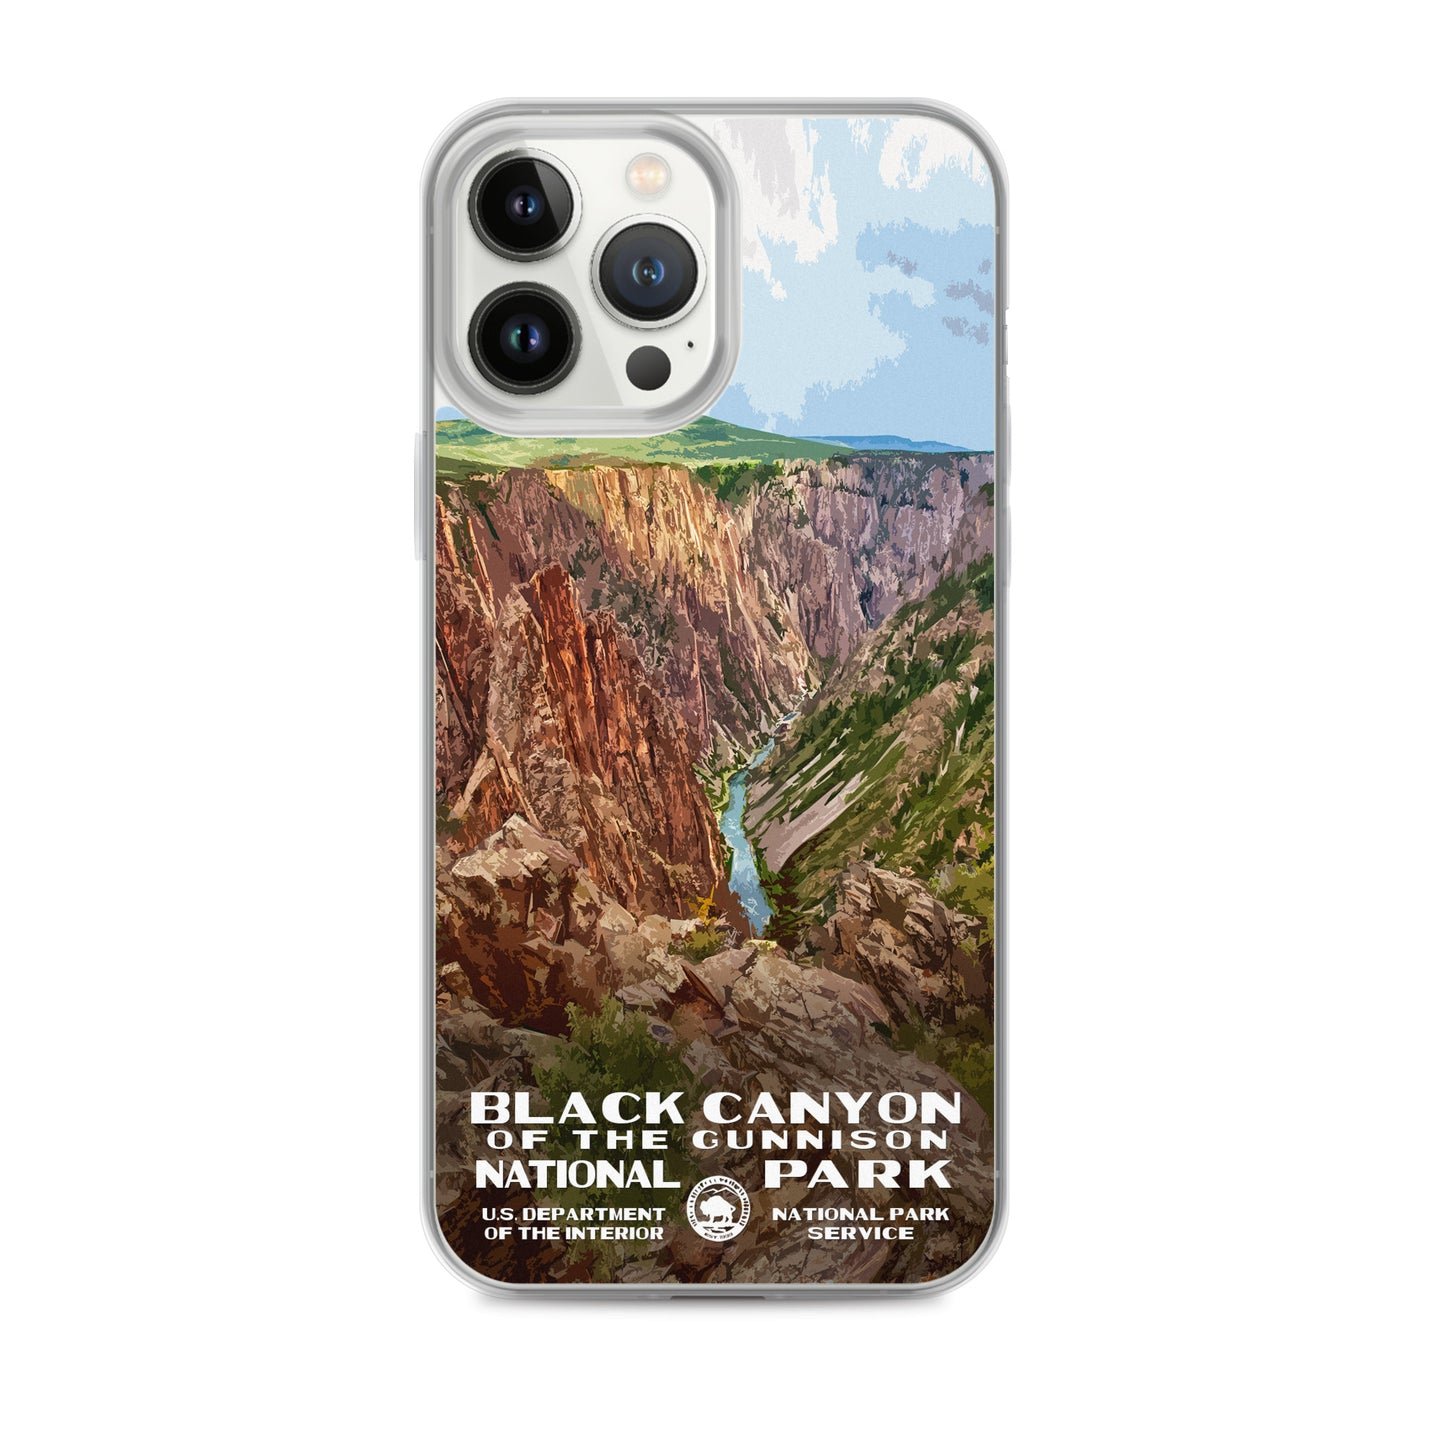 Black Canyon of the Gunnison National Park iPhone® Case